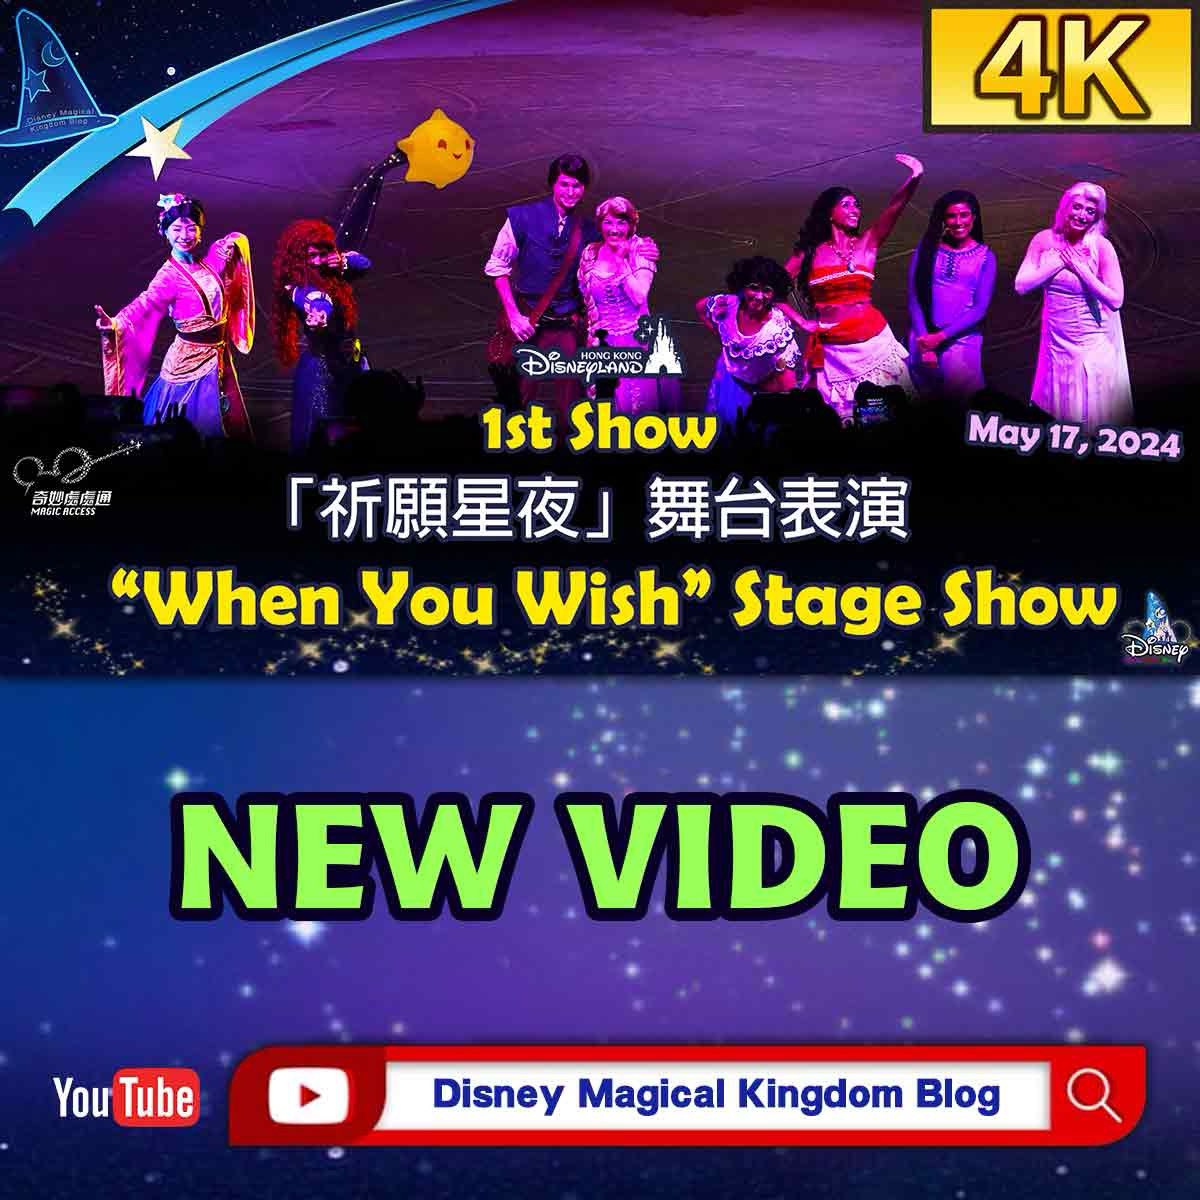 🌟 Let your dreams be your guide through an enchanting new theatrical stage show, “When You Wish,” specially curated for 'Platinum Celebration Gala' at Hong Kong Disneyland Resort. 🌟香港迪士尼樂園度假區 為「奇妙處處通」白金卡會員感謝晚會－「奇妙星願盛會」首次呈獻